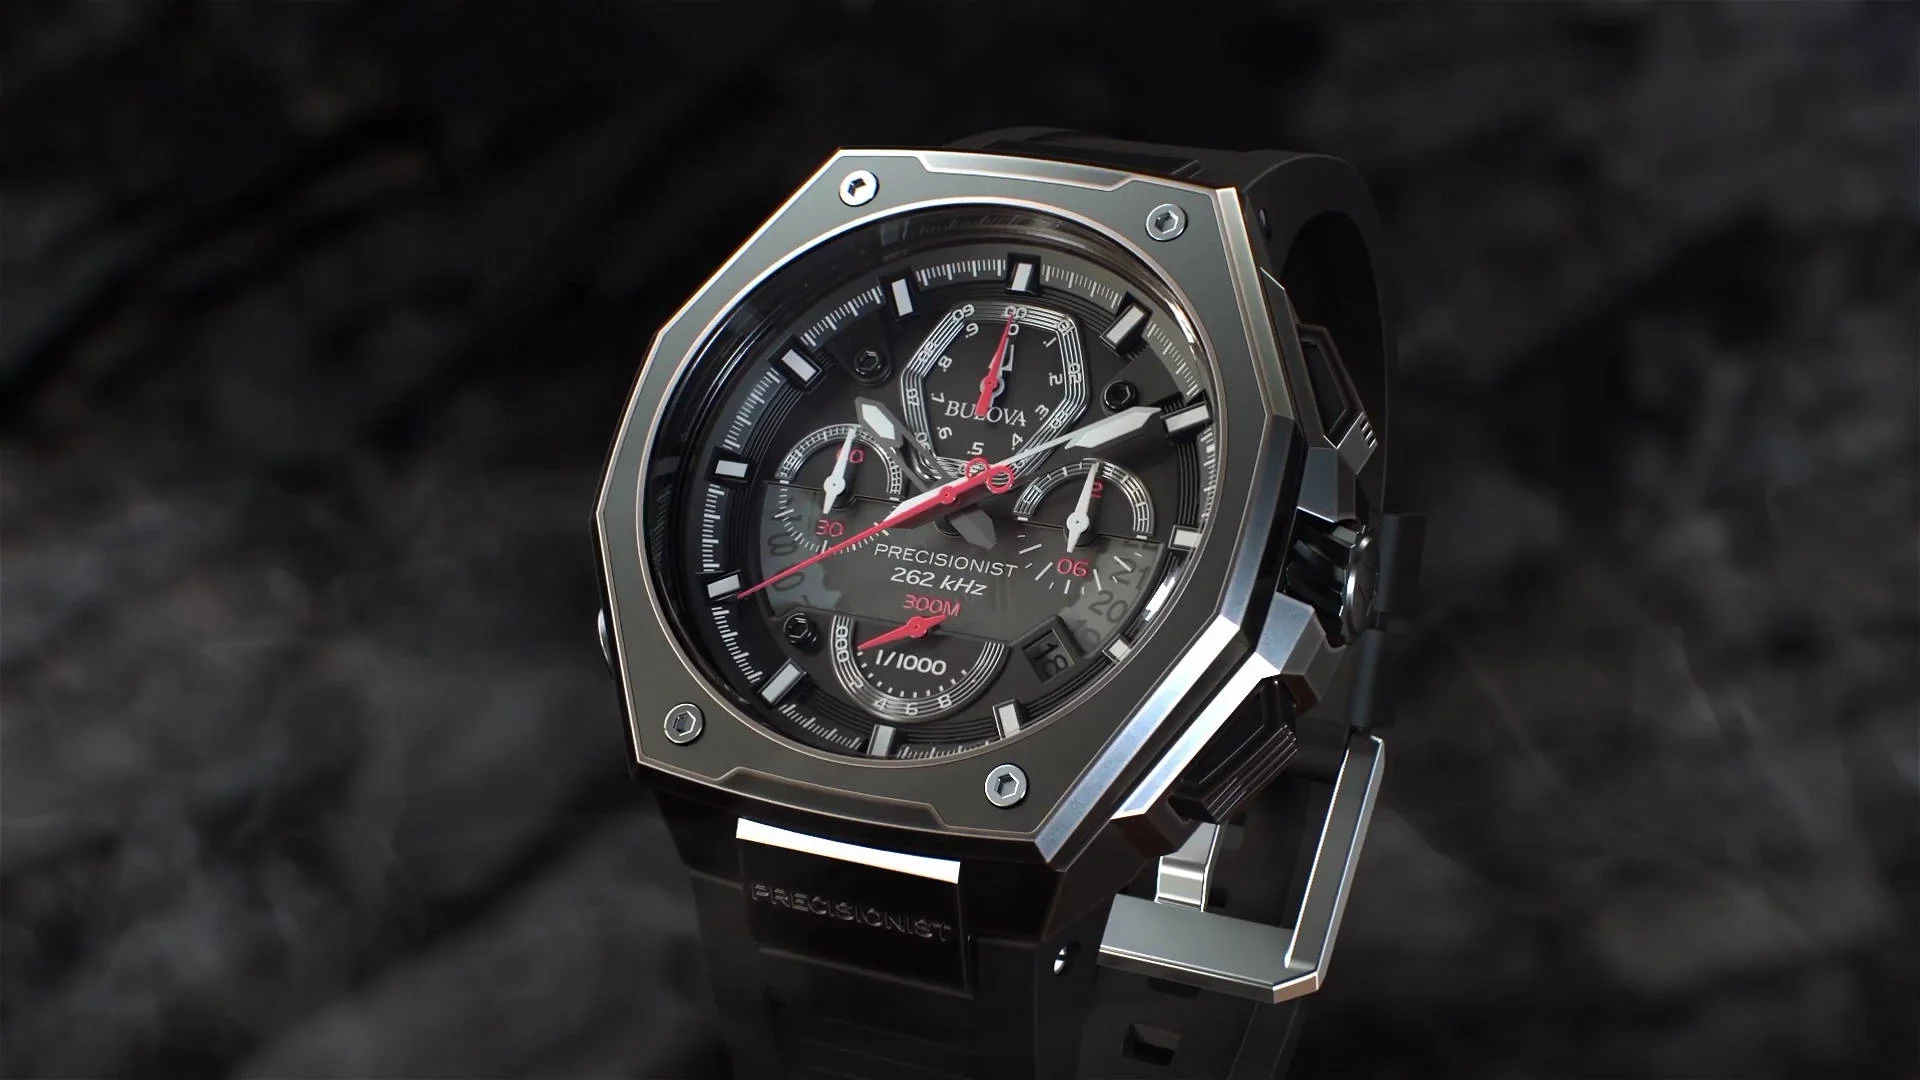 The Bulova Precisionist, “nothing is more precise”